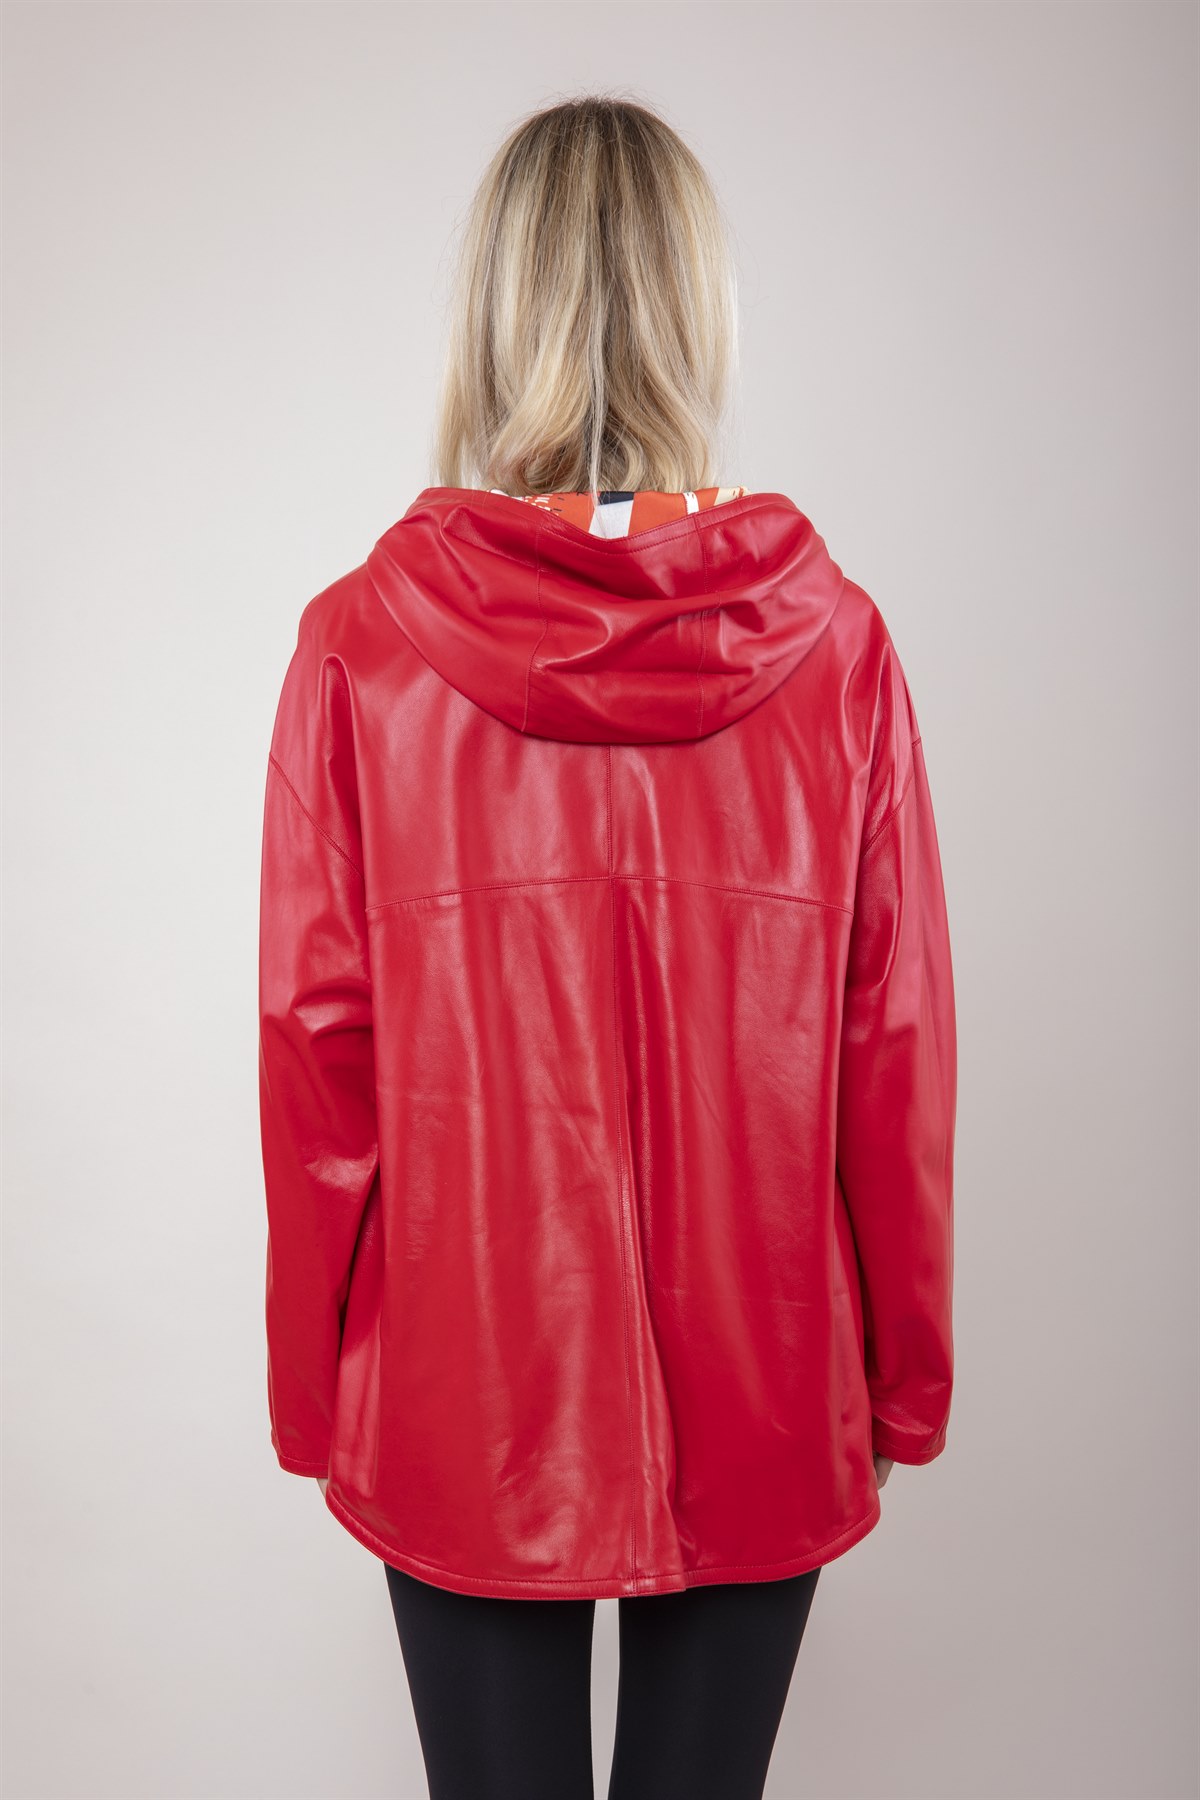 Picture of BESTDERI WOMEN'S RED LEATHER JACKET